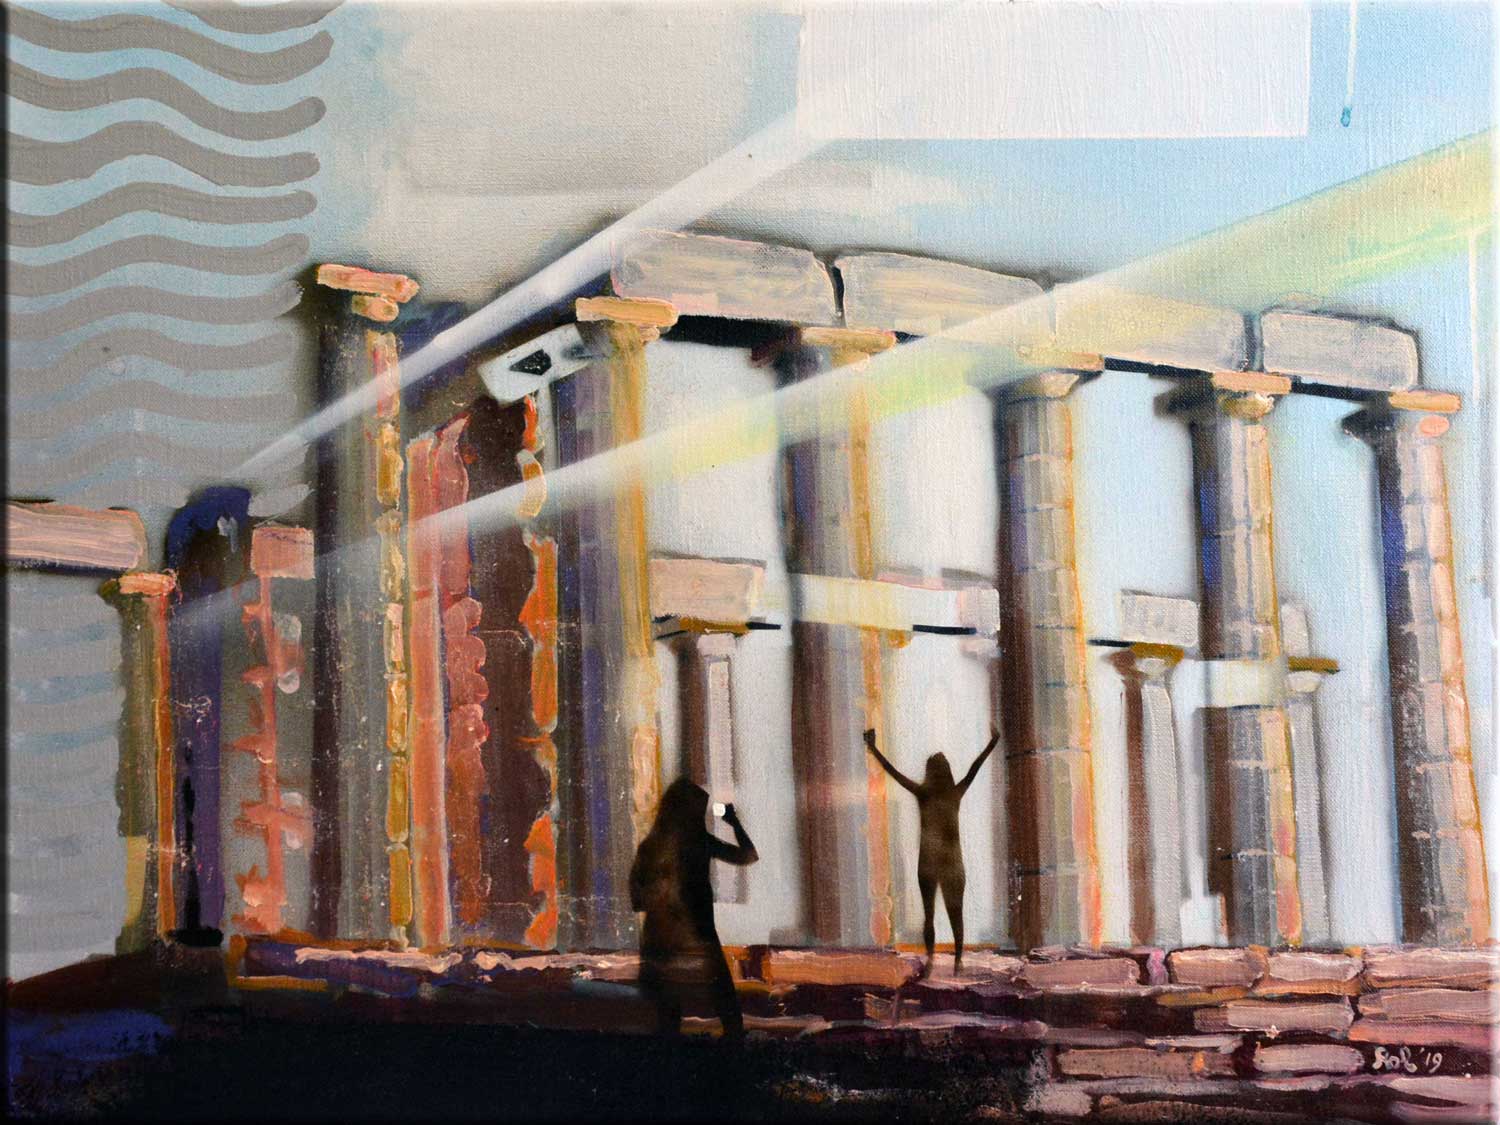 Painting Cap Sounion by Rob Lieveloo